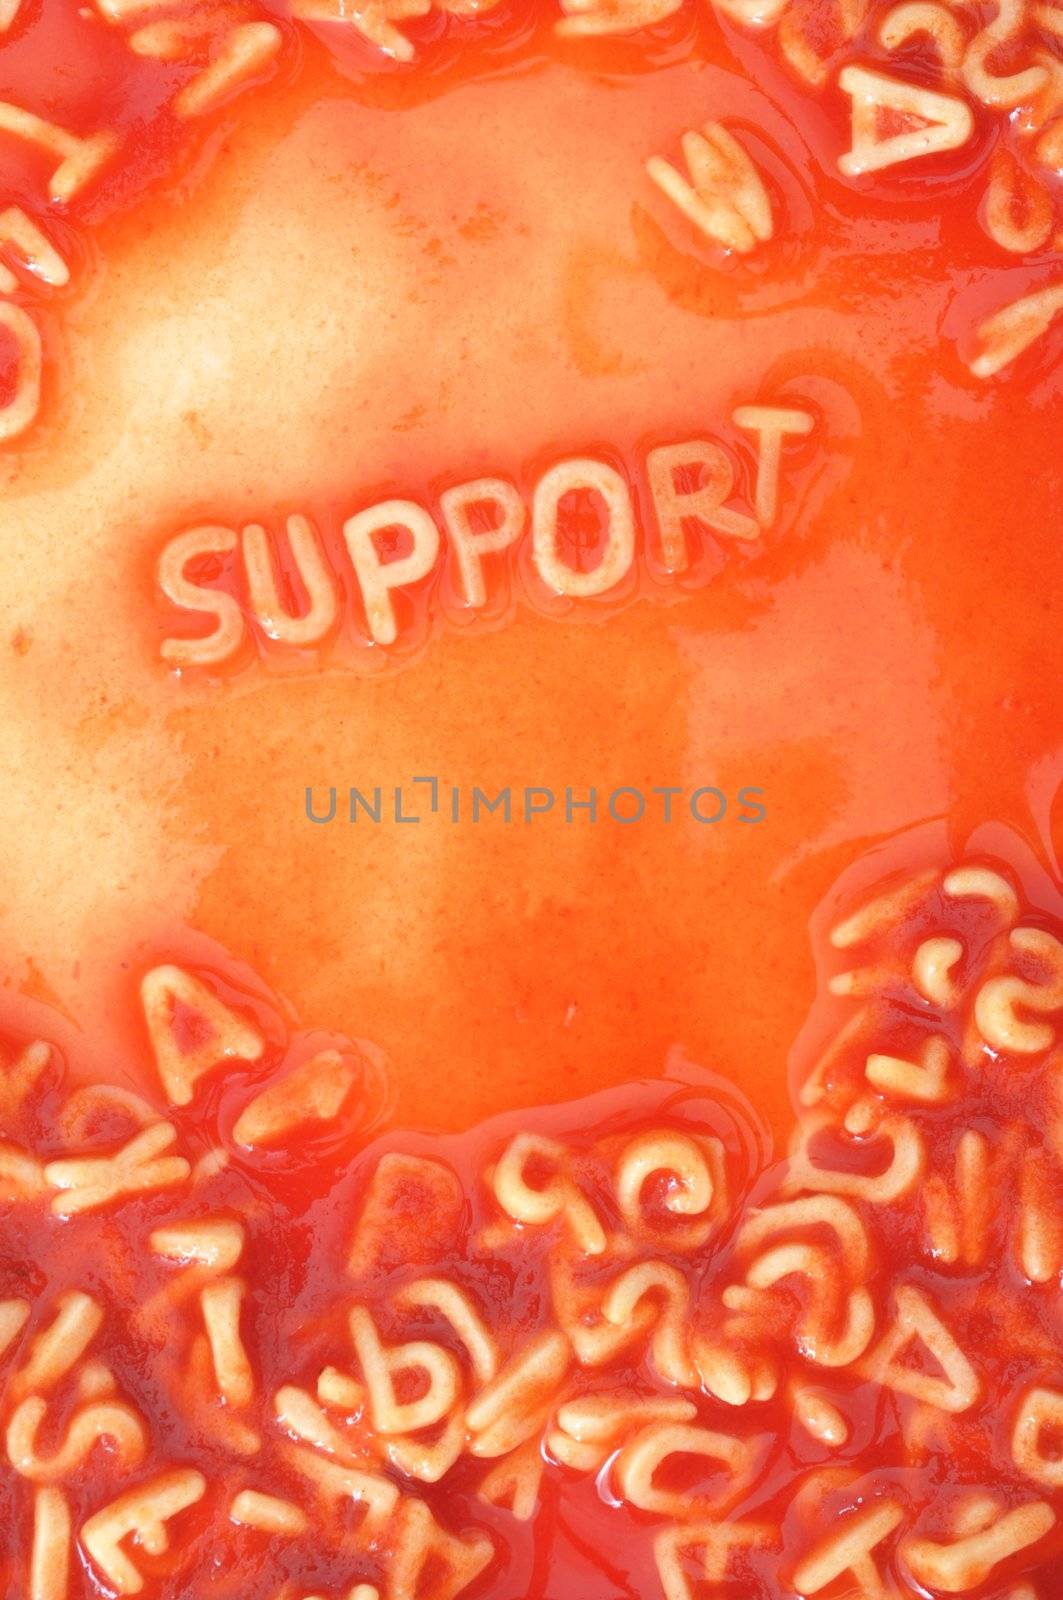 support or help concept with red pasta snack